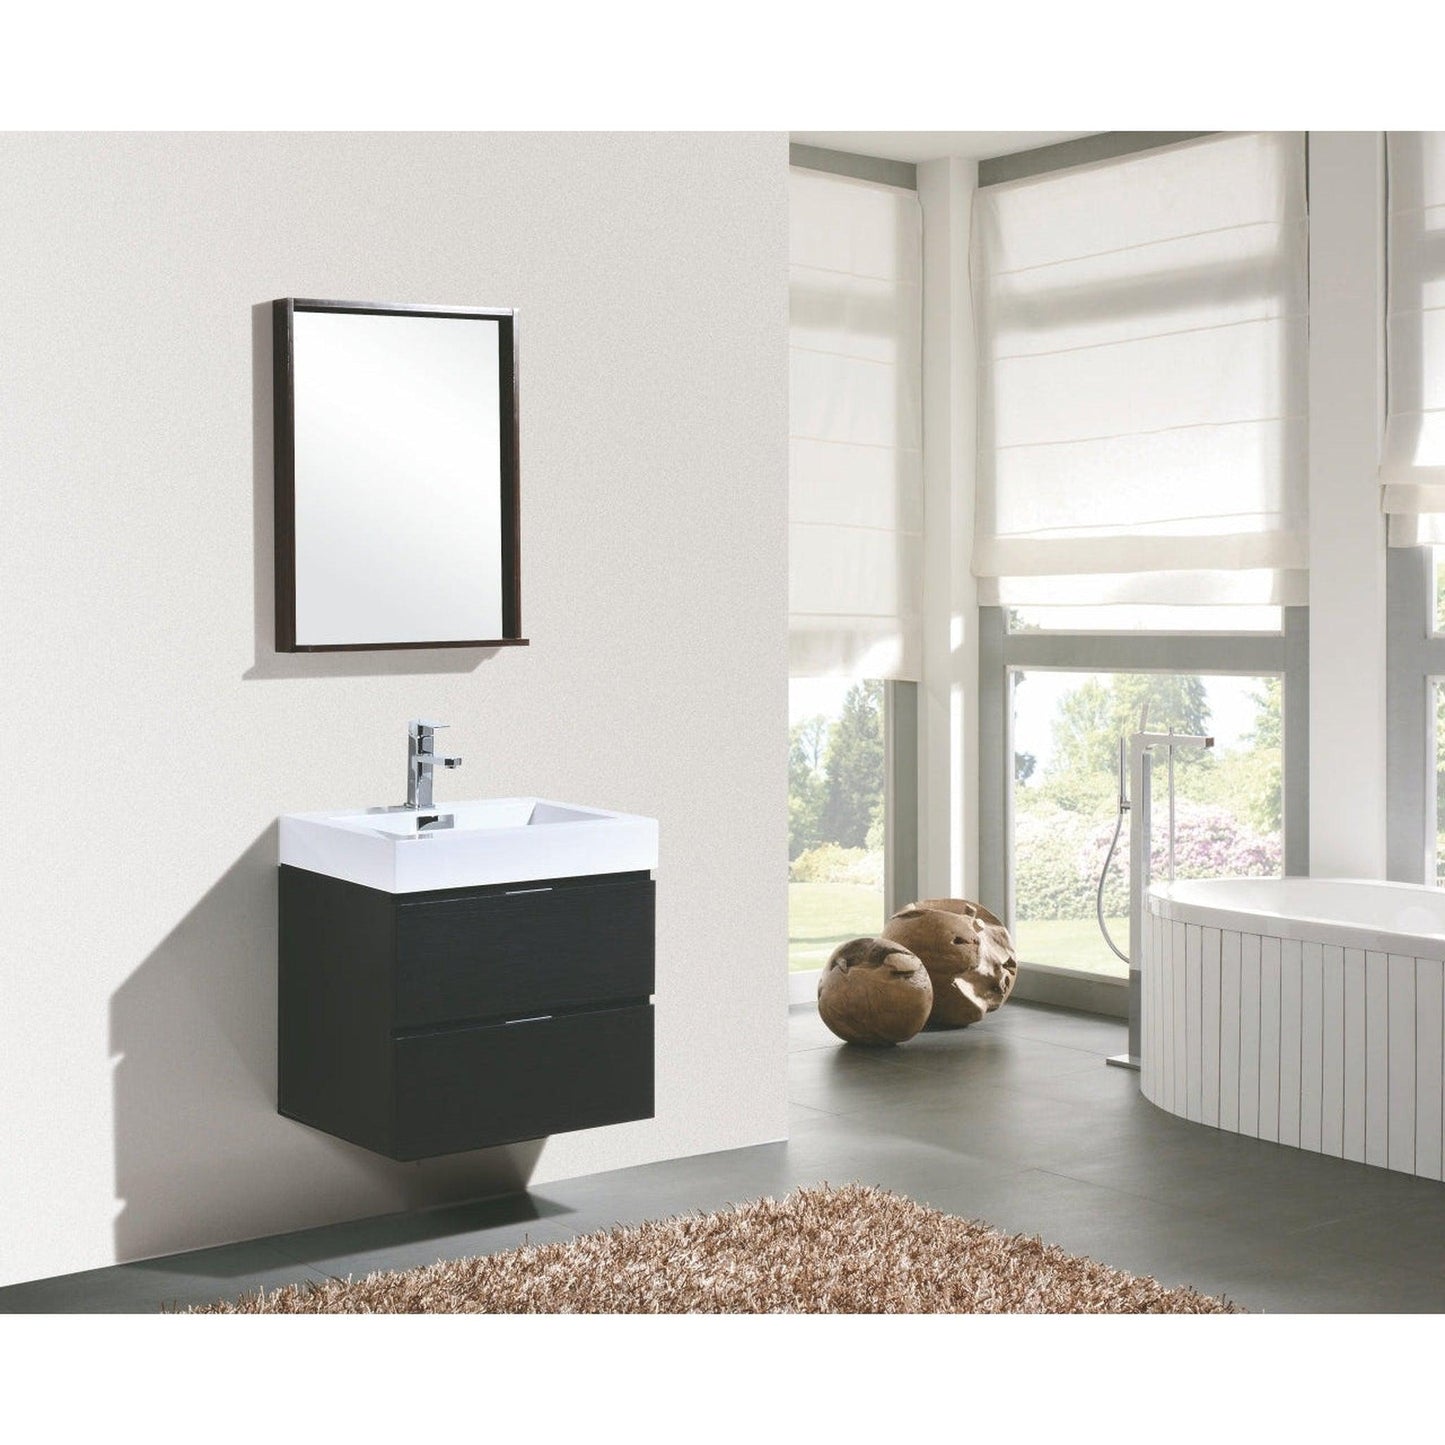 KubeBath Bliss 24" Black Wall-Mounted Modern Bathroom Vanity With Single Integrated Acrylic Sink With Overflow and 22" Black Framed Mirror With Shelf